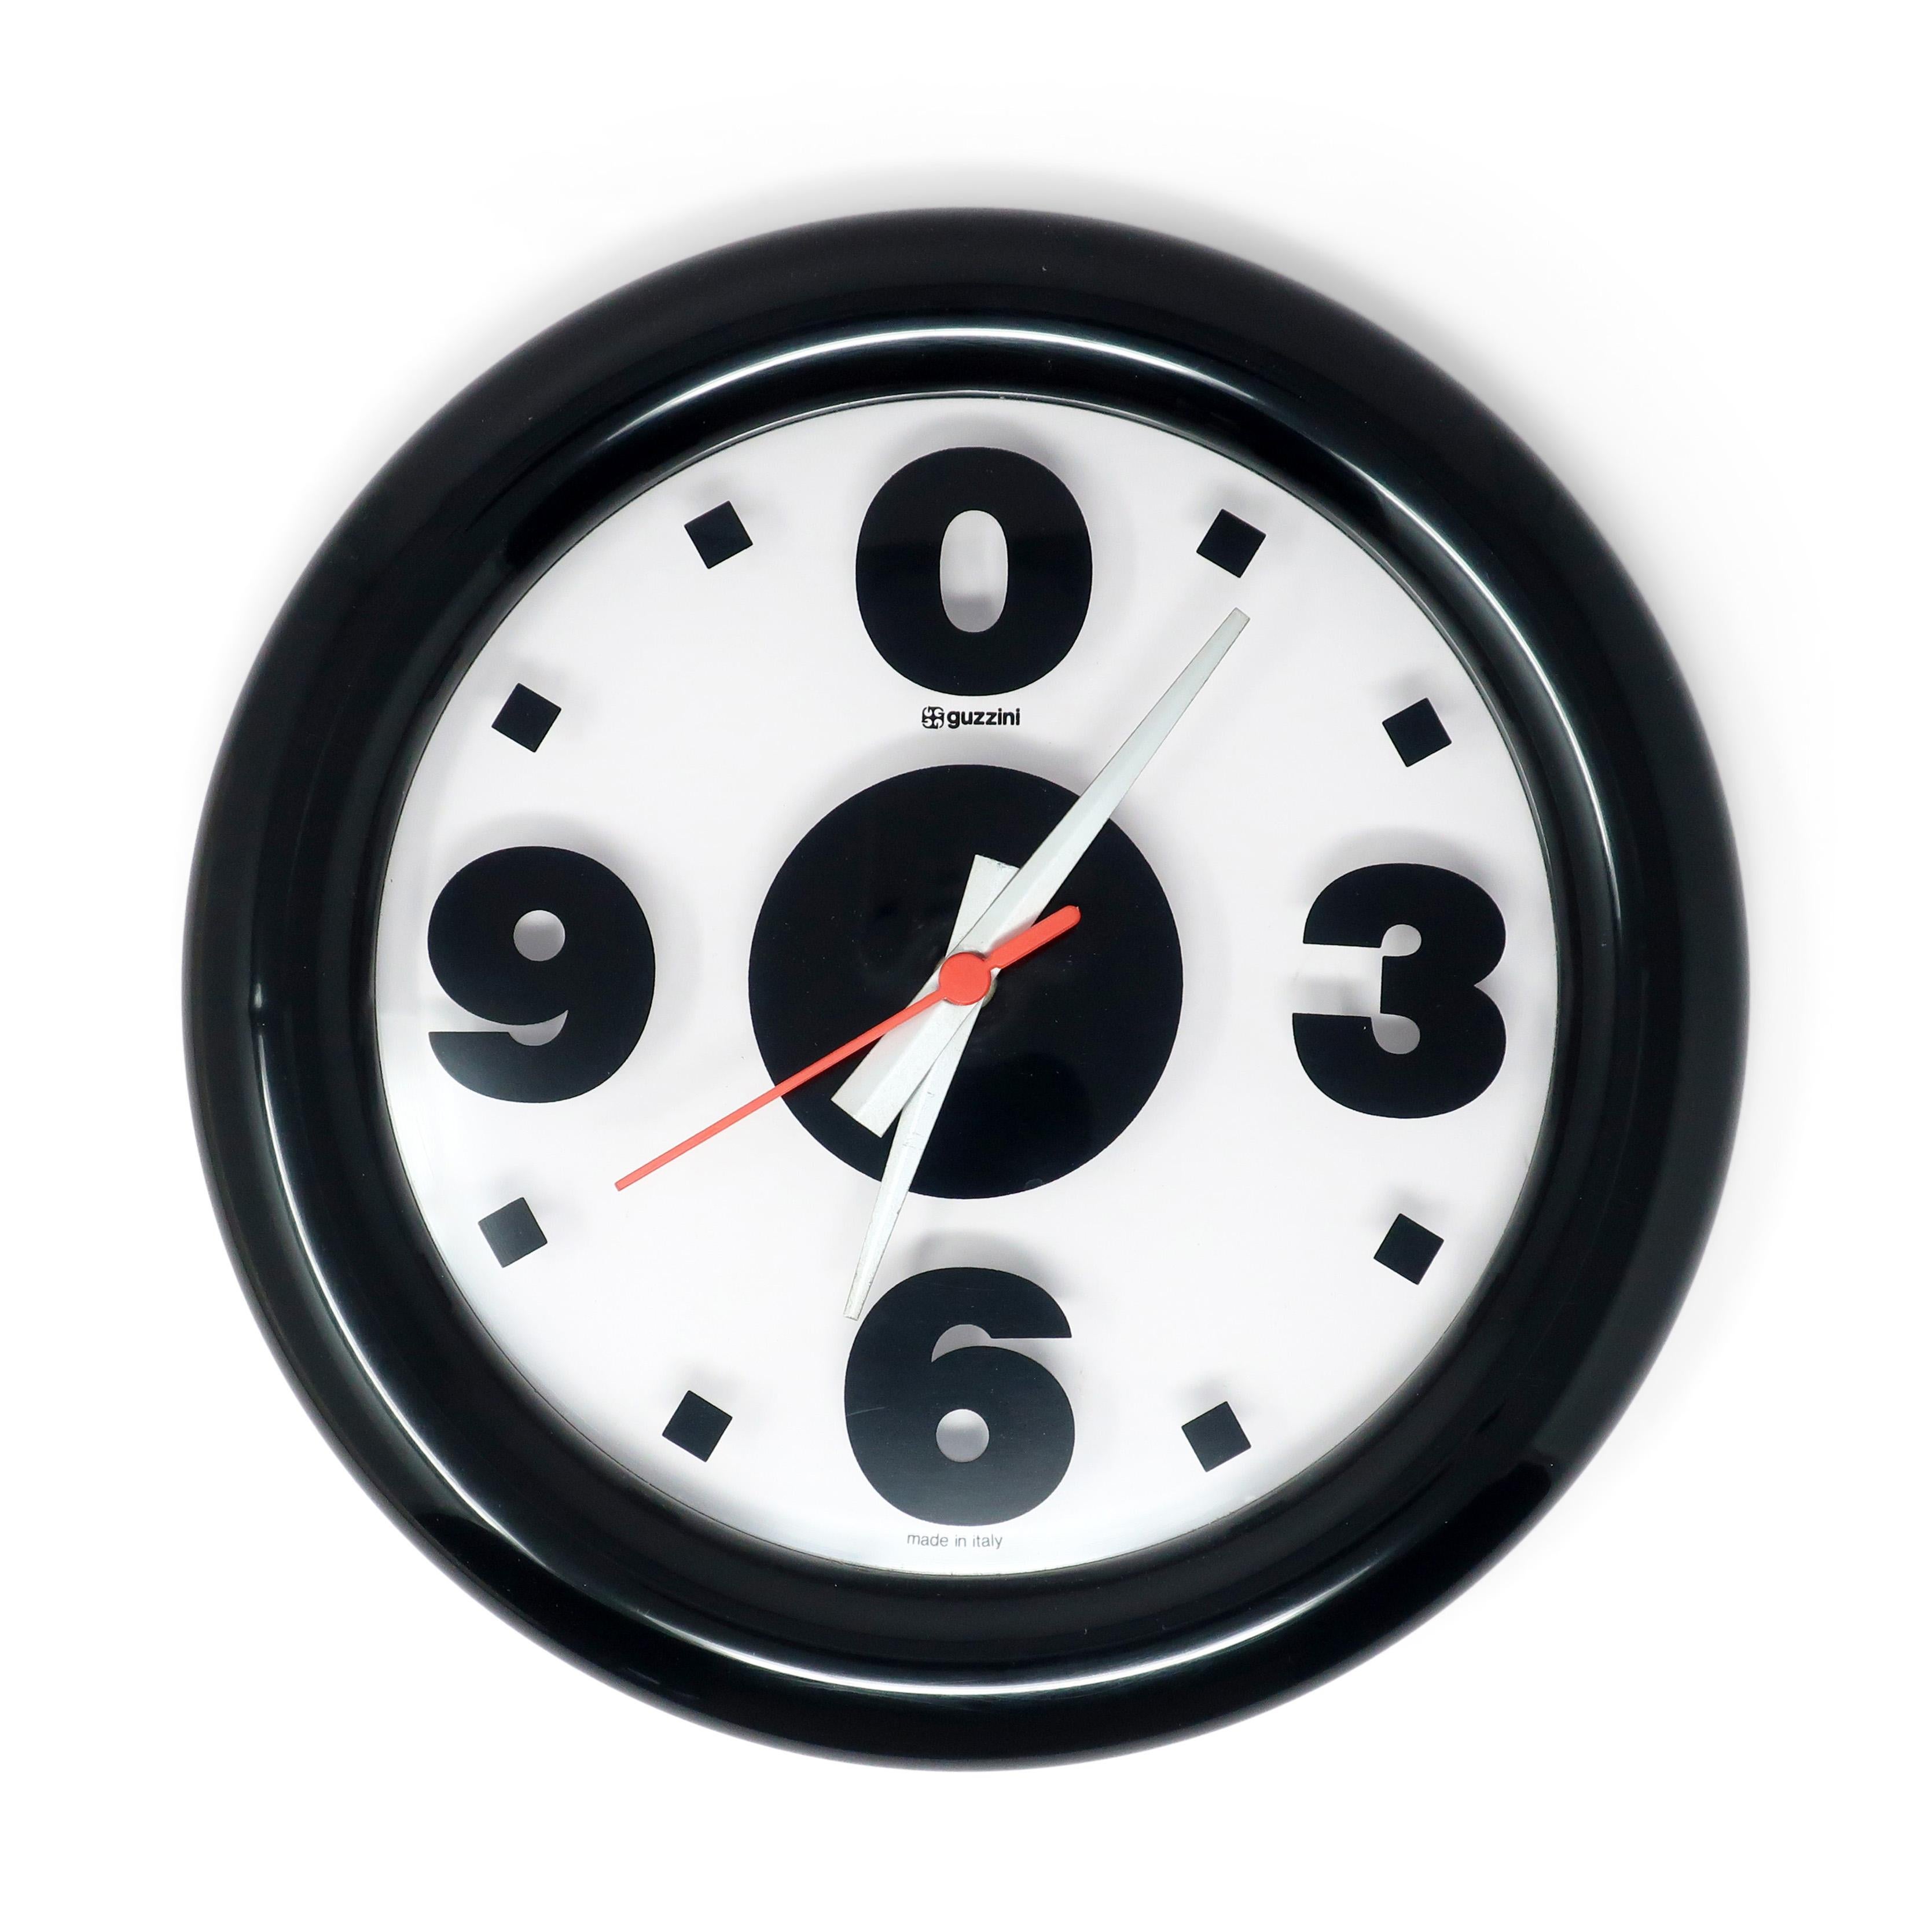 Italian postmodern design as its cleanest, this 1980s Guzzini wall clock has a black plastic body, clear lucite face, black numbers, and white and red hands.  A close to perfect design!

In good vintage condition with light wear consistent with age